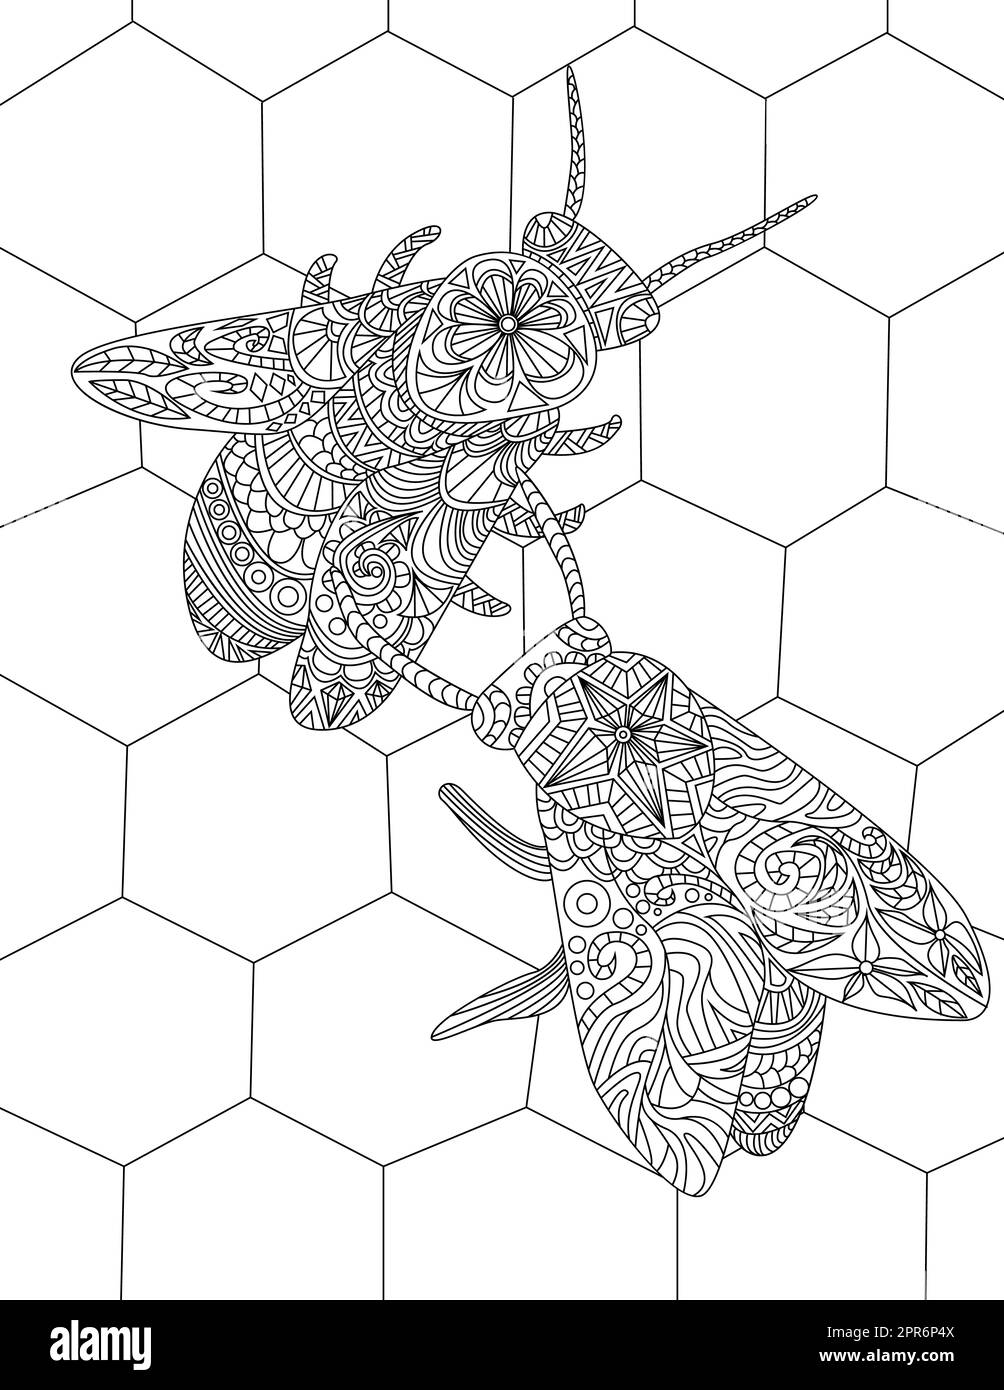 Patterns Coloring Book - Creative Bee